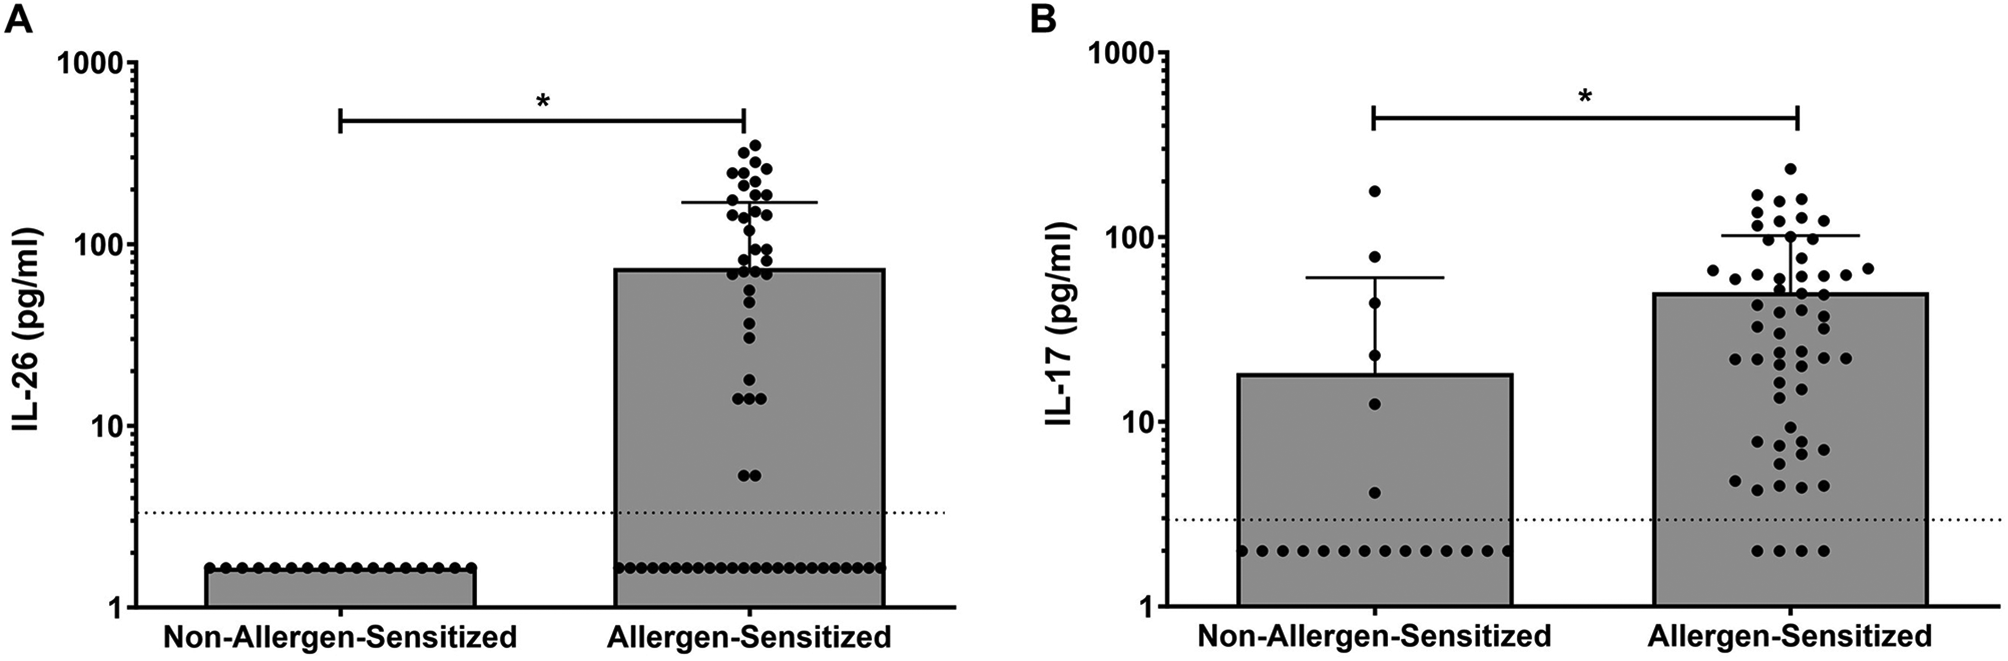 Systemic IL-26 correlates with improved asthma control in children sensitized to dog allergen